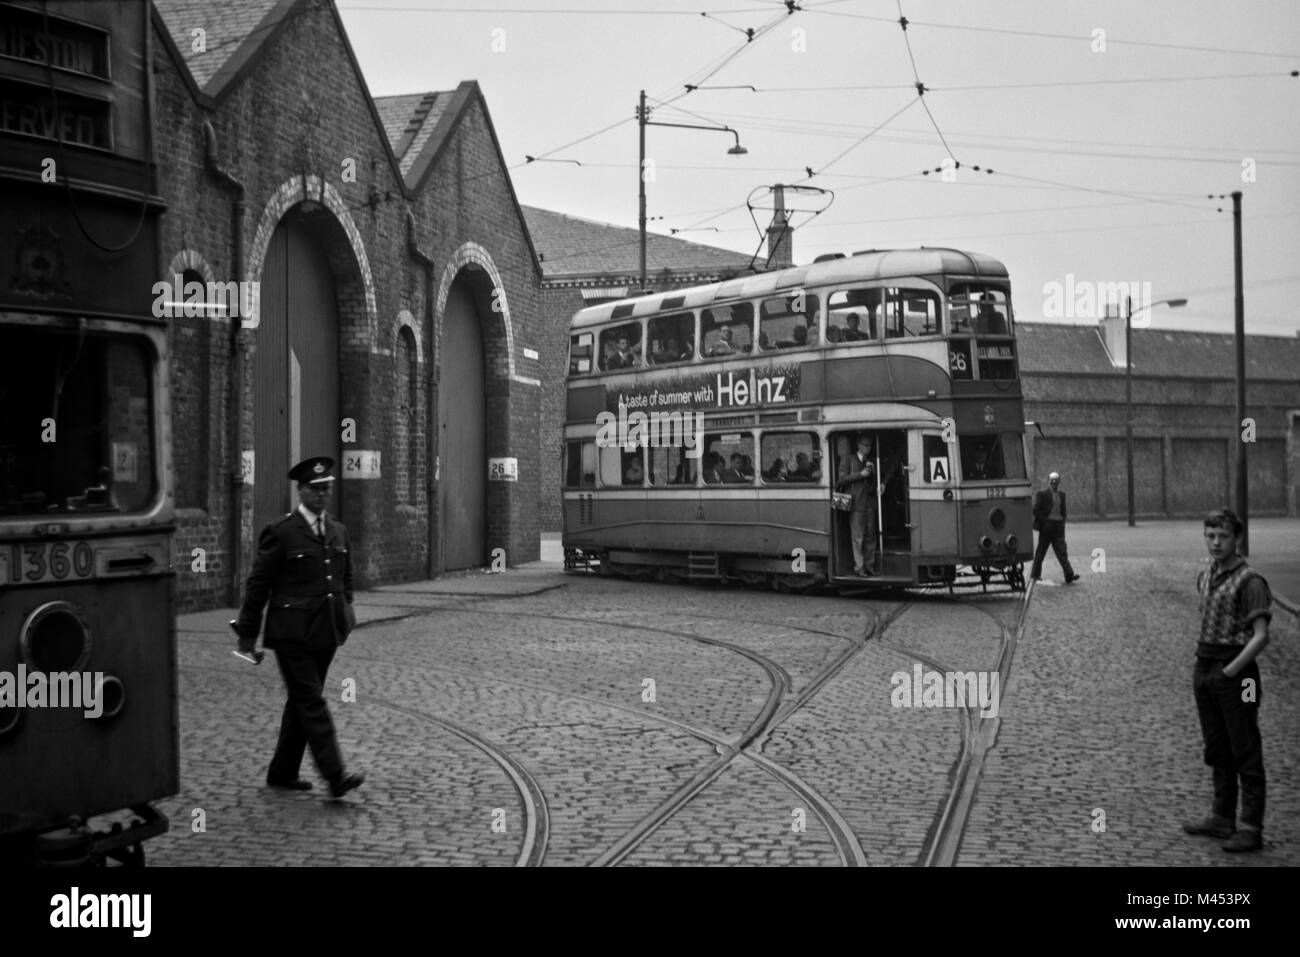 Glasgow Tram no 1222 outside 45 Ruby Street, Dalmarnock Tram Depot. The tram was on a special service route for the enthusiasts. Image taken in 1962 Stock Photo